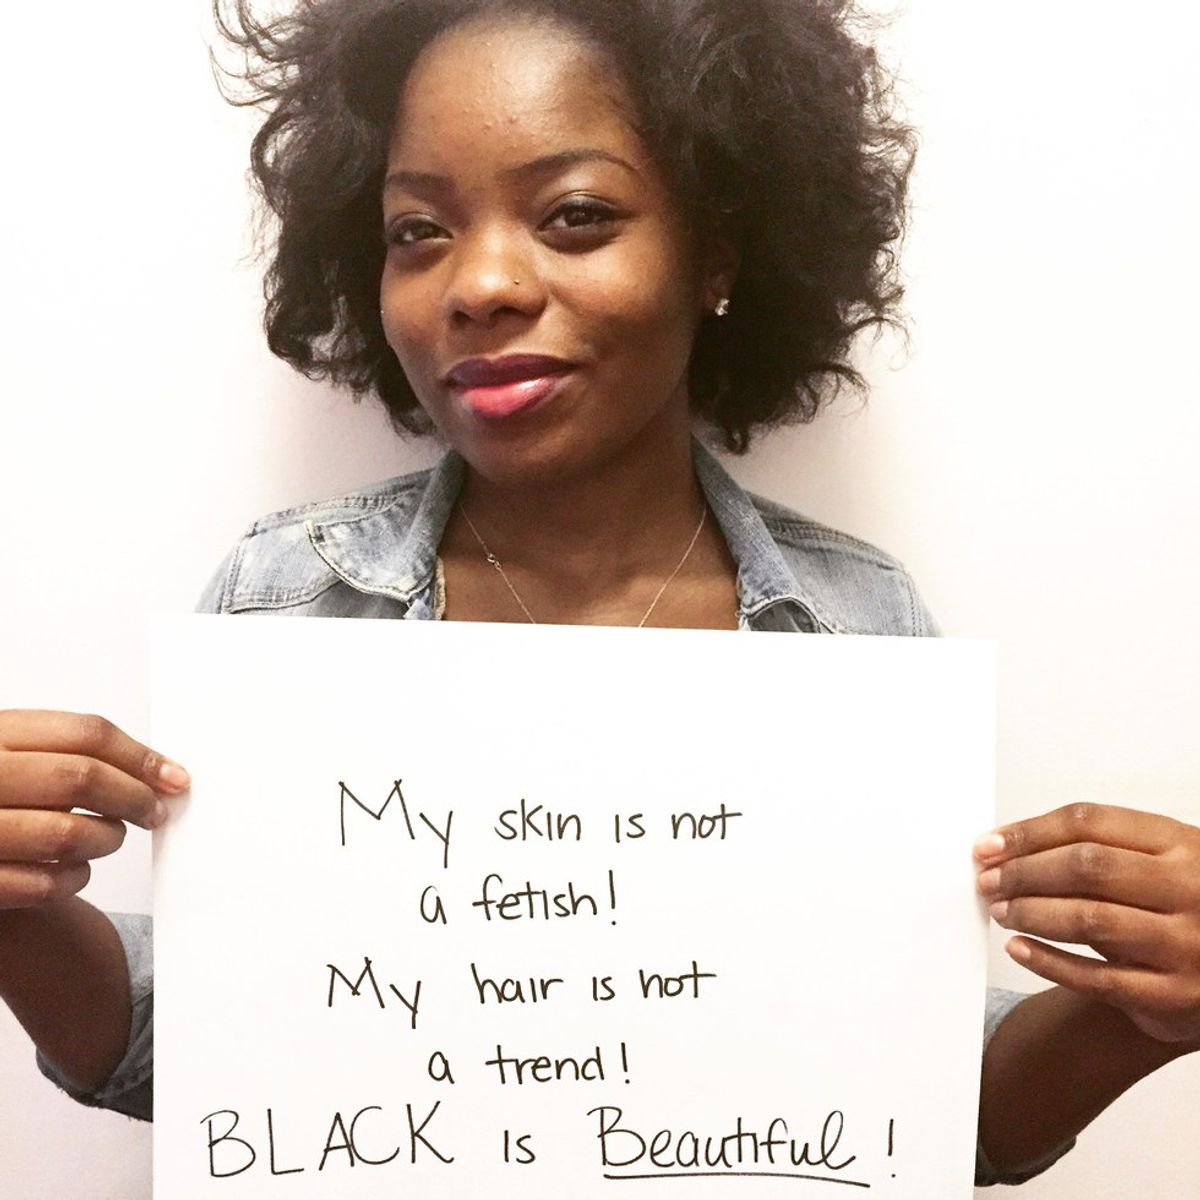 Black Women Are Not Your Plaything